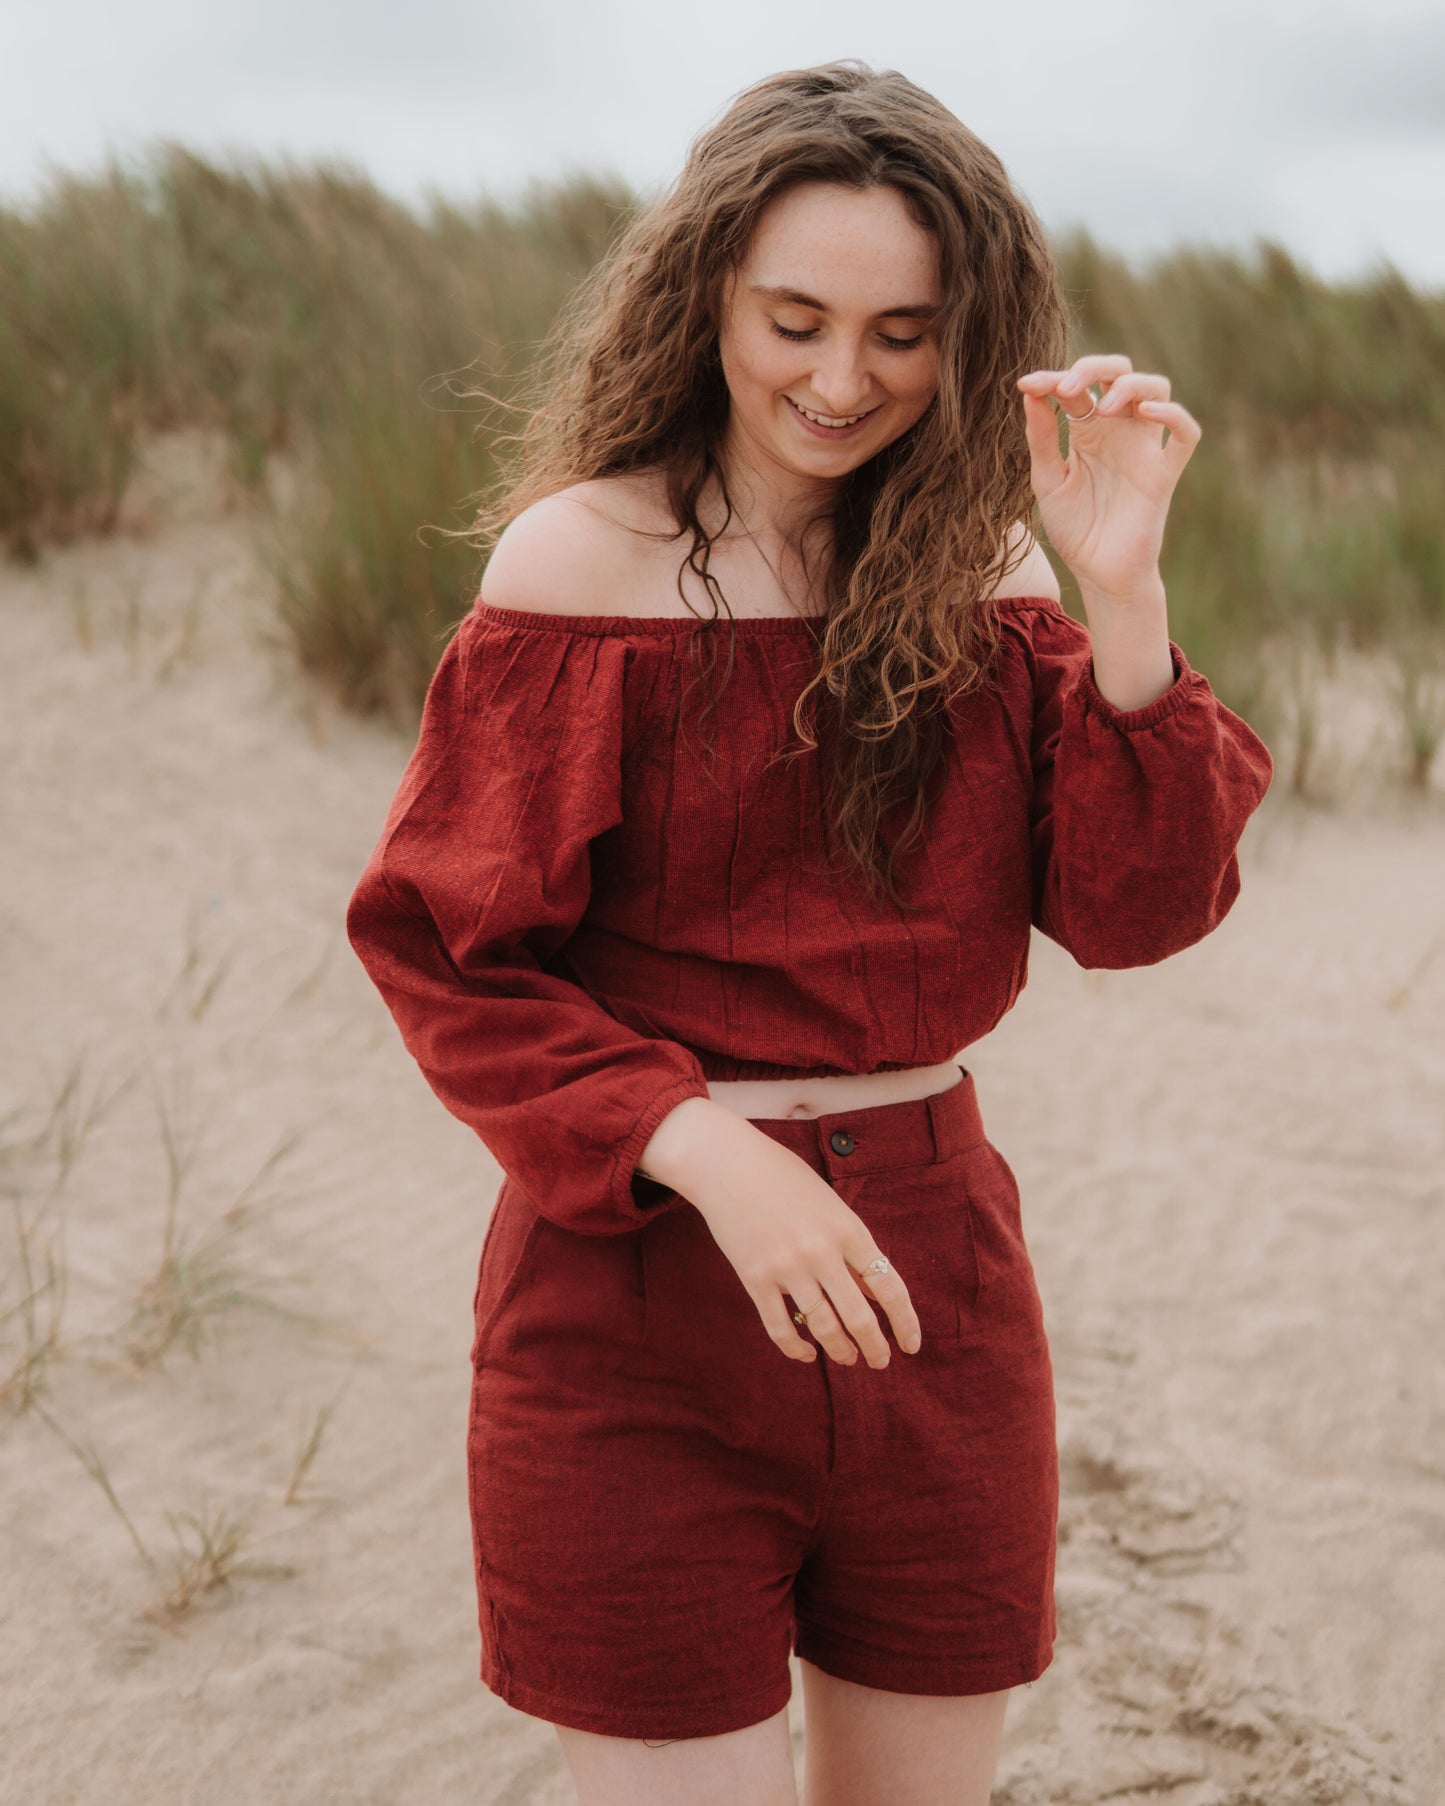 Clothing & Accessories > Clothing > Shirts & Tops Jannu Of-The-Shoulder Top - Burgundy Hemp & Hope ethical sustainable handmade